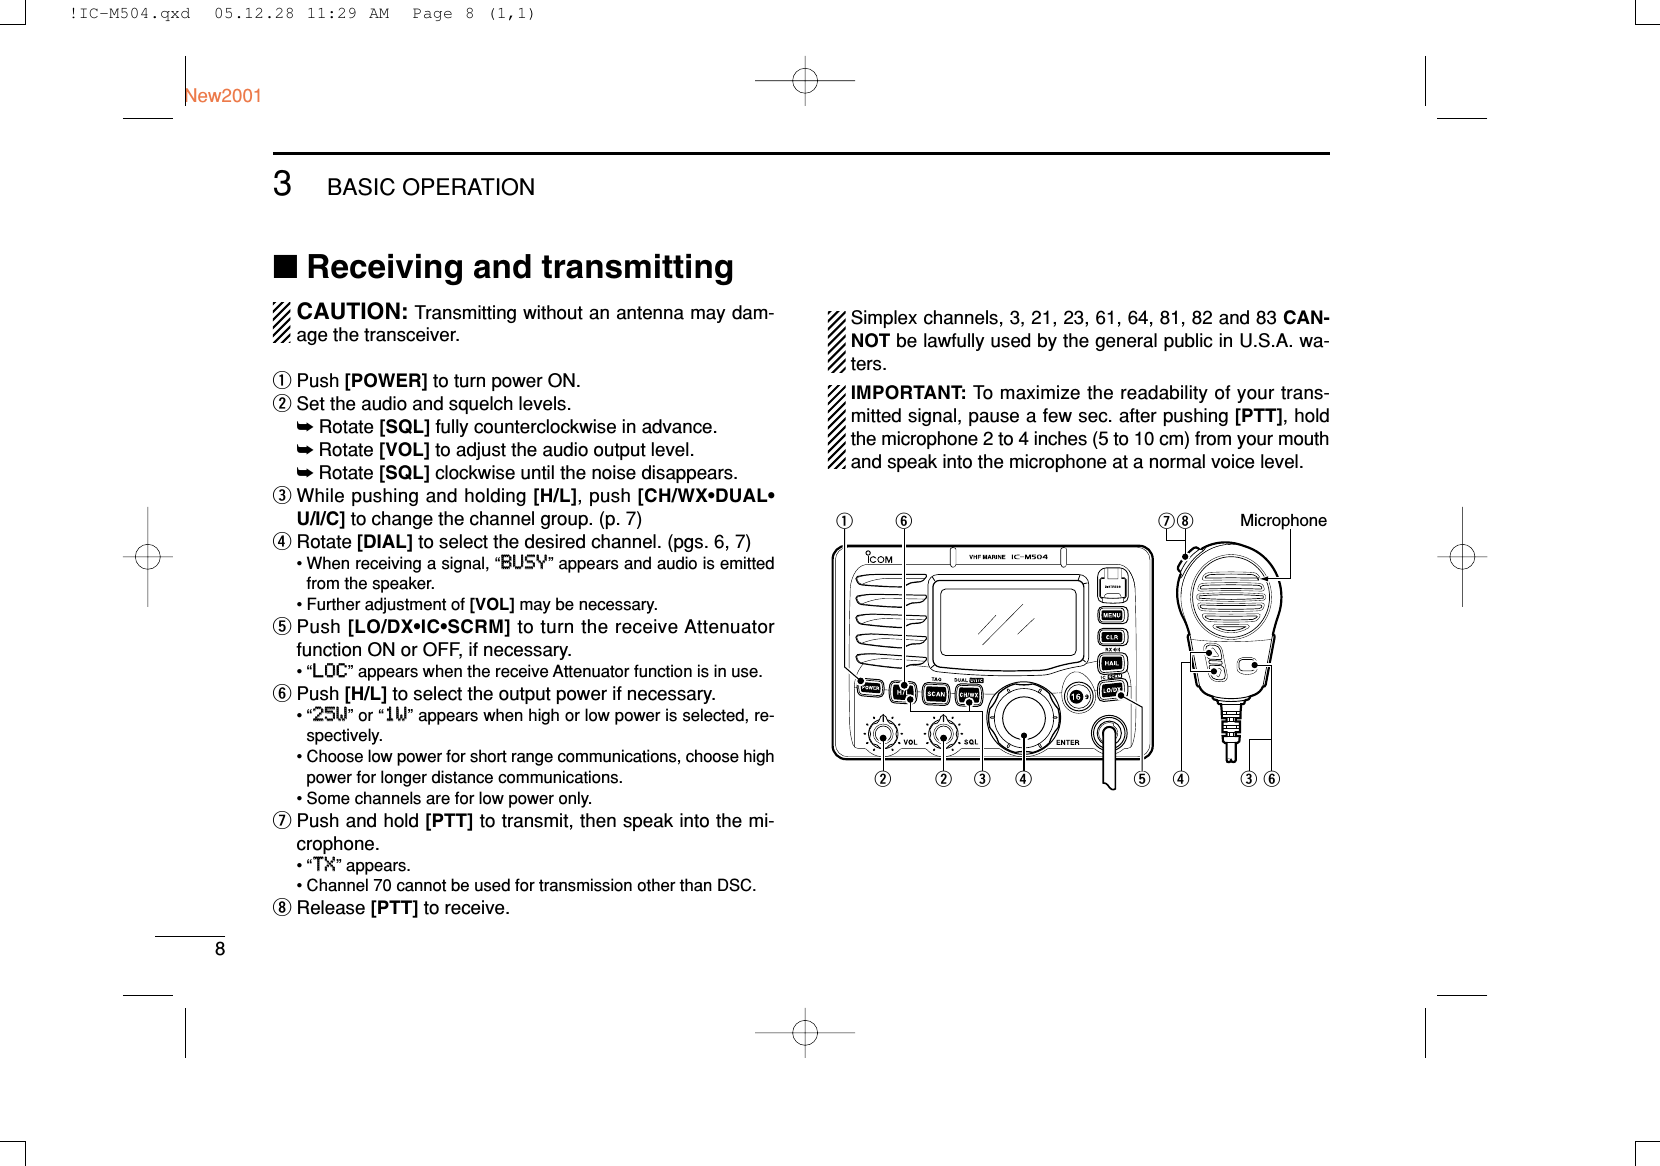 83BASIC OPERATIONNew2001■Receiving and transmittingCAUTION: Transmitting without an antenna may dam-age the transceiver.qPush [POWER] to turn power ON.wSet the audio and squelch levels.➥Rotate [SQL] fully counterclockwise in advance.➥Rotate [VOL] to adjust the audio output level.➥Rotate [SQL] clockwise until the noise disappears.eWhile pushing and holding [H/L], push [CH/WX•DUAL•U/I/C] to change the channel group. (p. 7)rRotate [DIAL] to select the desired channel. (pgs. 6, 7)• When receiving a signal, “BBUUSSYY” appears and audio is emittedfrom the speaker.• Further adjustment of [VOL] may be necessary.tPush [LO/DX•IC•SCRM] to turn the receive Attenuatorfunction ON or OFF, if necessary.•“LLOOCC” appears when the receive Attenuator function is in use.yPush [H/L] to select the output power if necessary.•“2255WW” or “11WW” appears when high or low power is selected, re-spectively.• Choose low power for short range communications, choose highpower for longer distance communications.• Some channels are for low power only.uPush and hold [PTT] to transmit, then speak into the mi-crophone.•“TTXX” appears.• Channel 70 cannot be used for transmission other than DSC.iRelease [PTT] to receive.Simplex channels, 3, 21, 23, 61, 64, 81, 82 and 83 CAN-NOT be lawfully used by the general public in U.S.A. wa-ters.IMPORTANT: To maximize the readability of your trans-mitted signal, pause a few sec. after pushing [PTT], holdthe microphone 2 to 4 inches (5 to 10 cm) from your mouthand speak into the microphone at a normal voice level.tMicrophoneqyrewwiurey!IC-M504.qxd  05.12.28 11:29 AM  Page 8 (1,1)